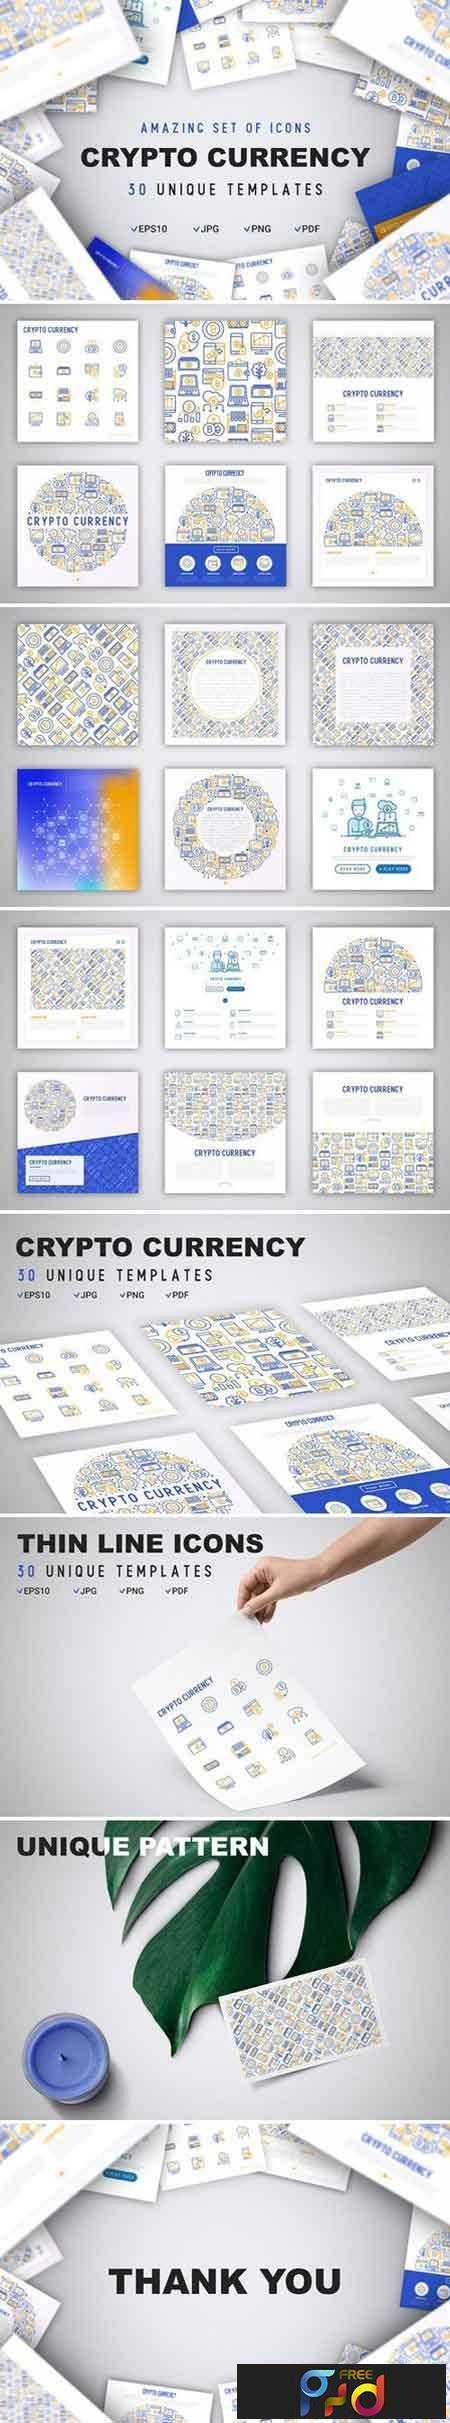 1804096 Crypto Currency Icons Set Concept 2112600 1